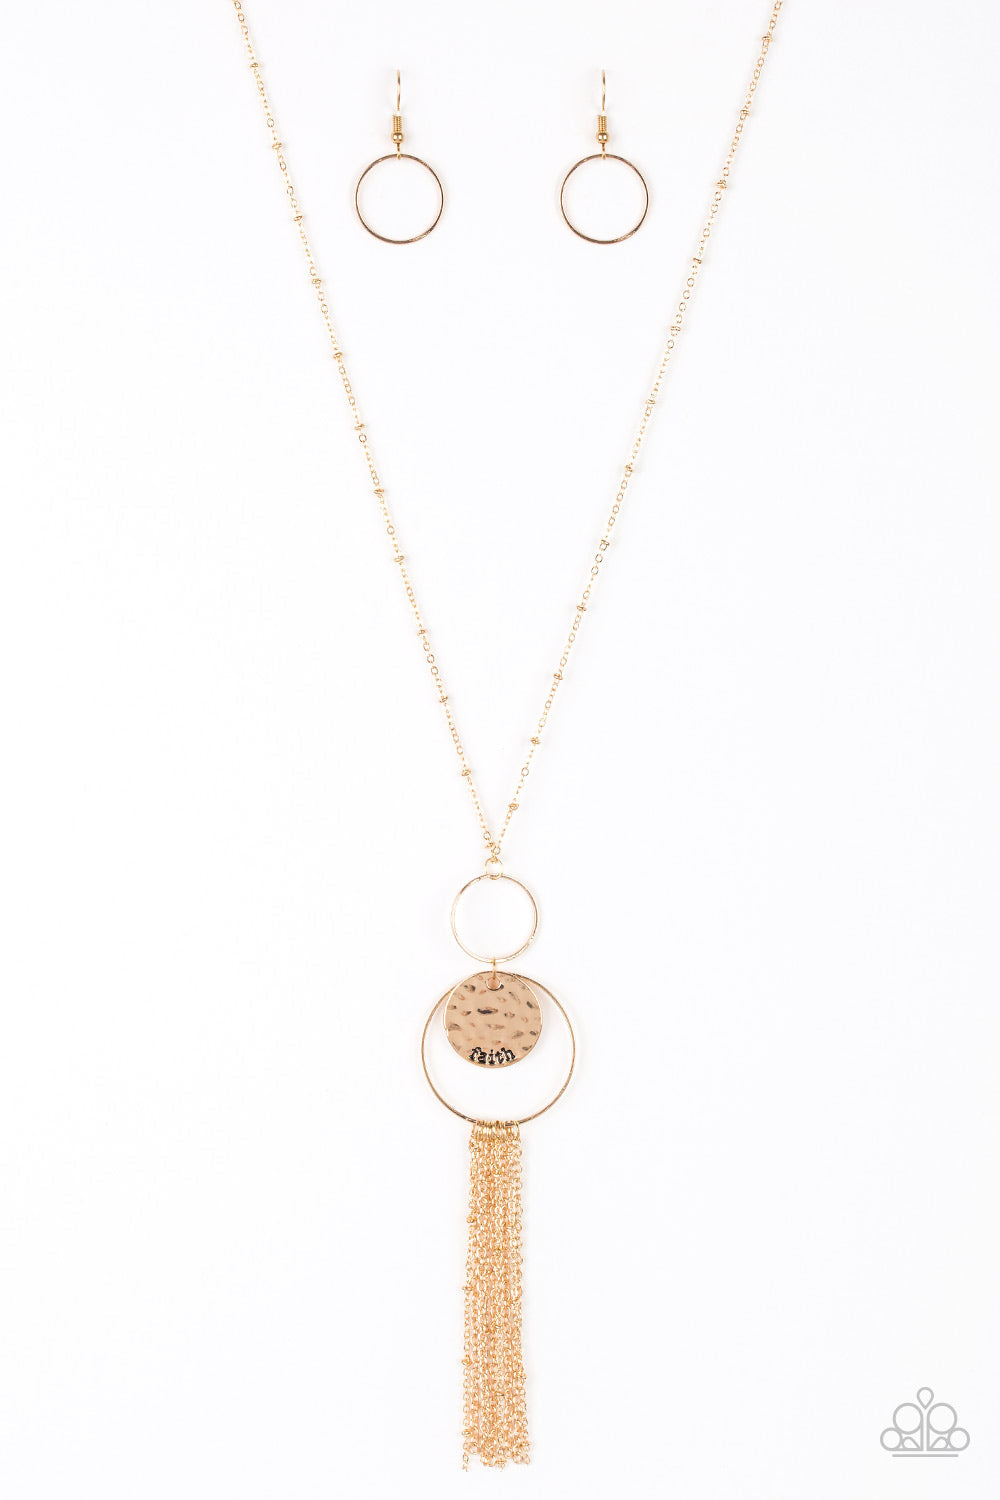 Faith Makes All Things Possible - Gold Necklace - Paparazzi Accessories - A delicately hammered gold disc is stamped in the inspirational word, "faith" and suspended from a double-hooped pendant at the bottom of an elongated gold satellite chain. A gold tassel swings from the bottom of the shimmery palette for a whimsical finish. Features an adjustable clasp closure. Sold as one individual necklace.